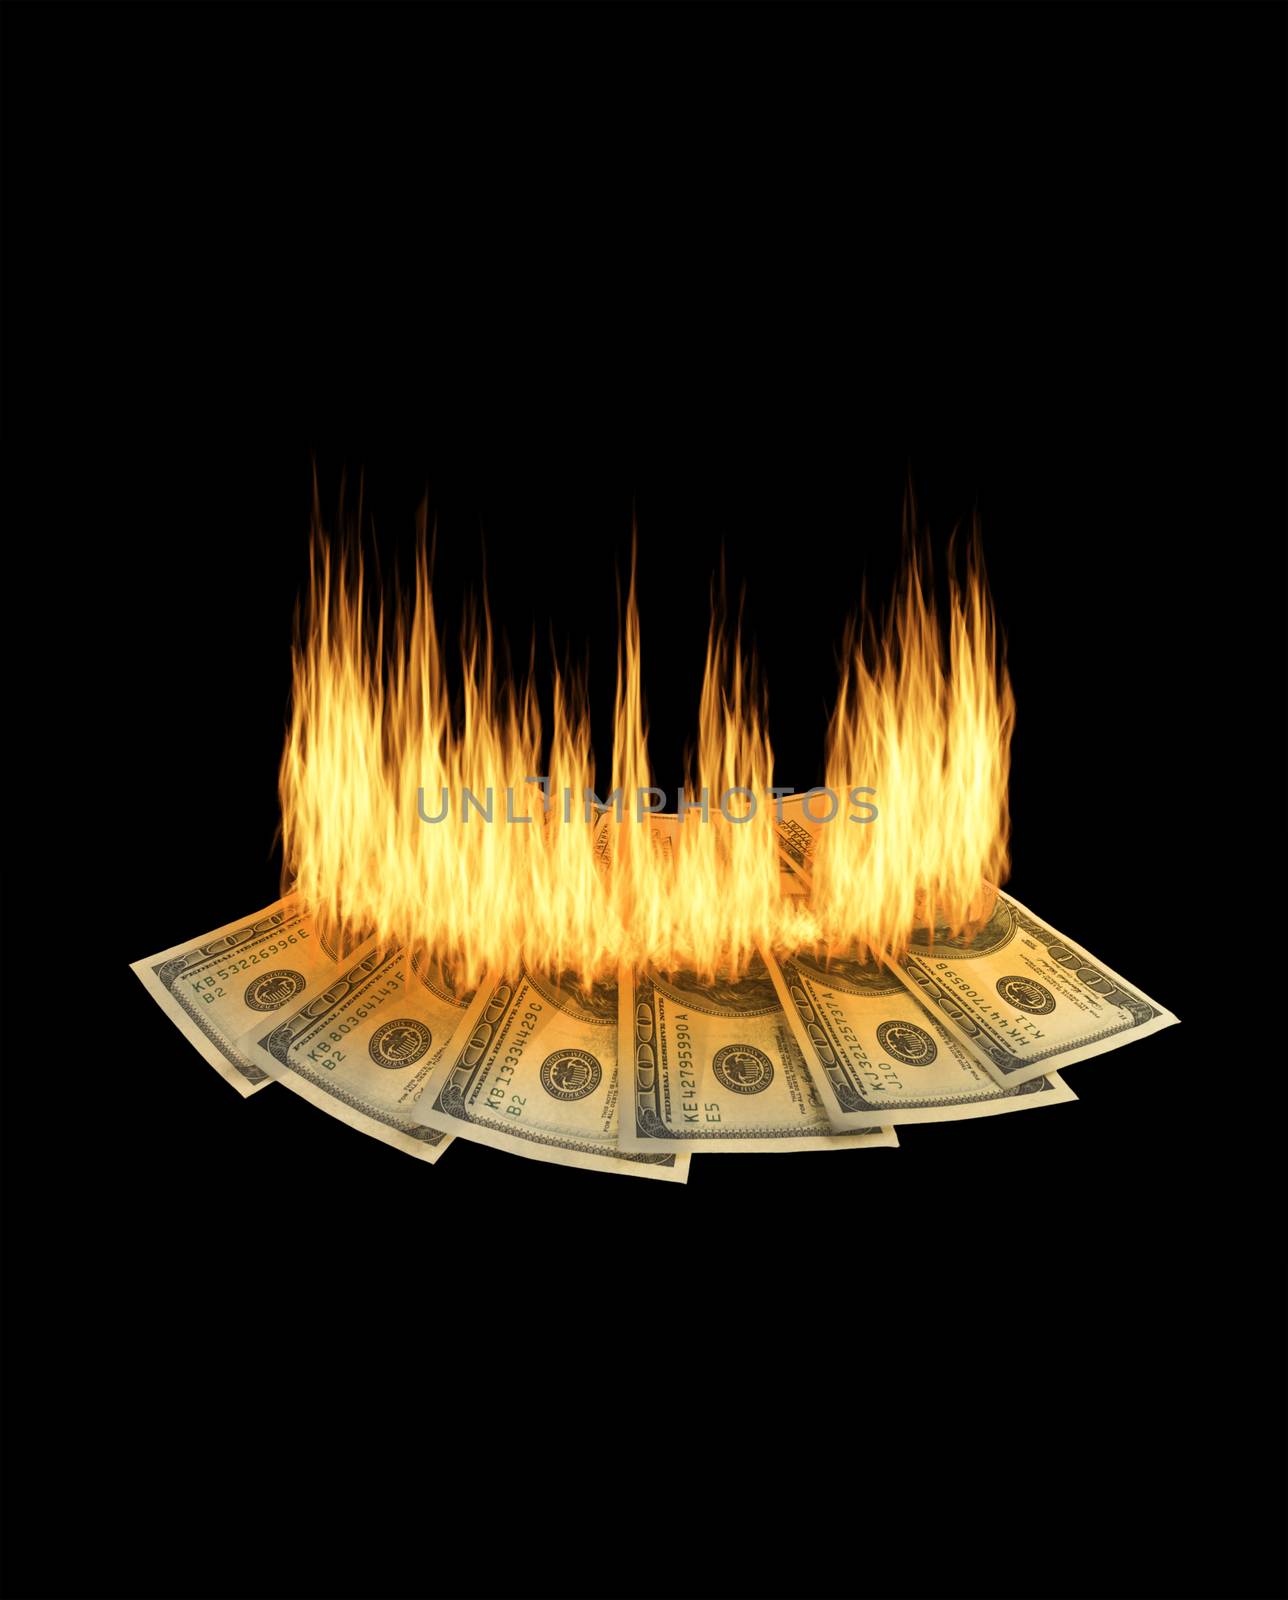 Money to burn by f/2sumicron